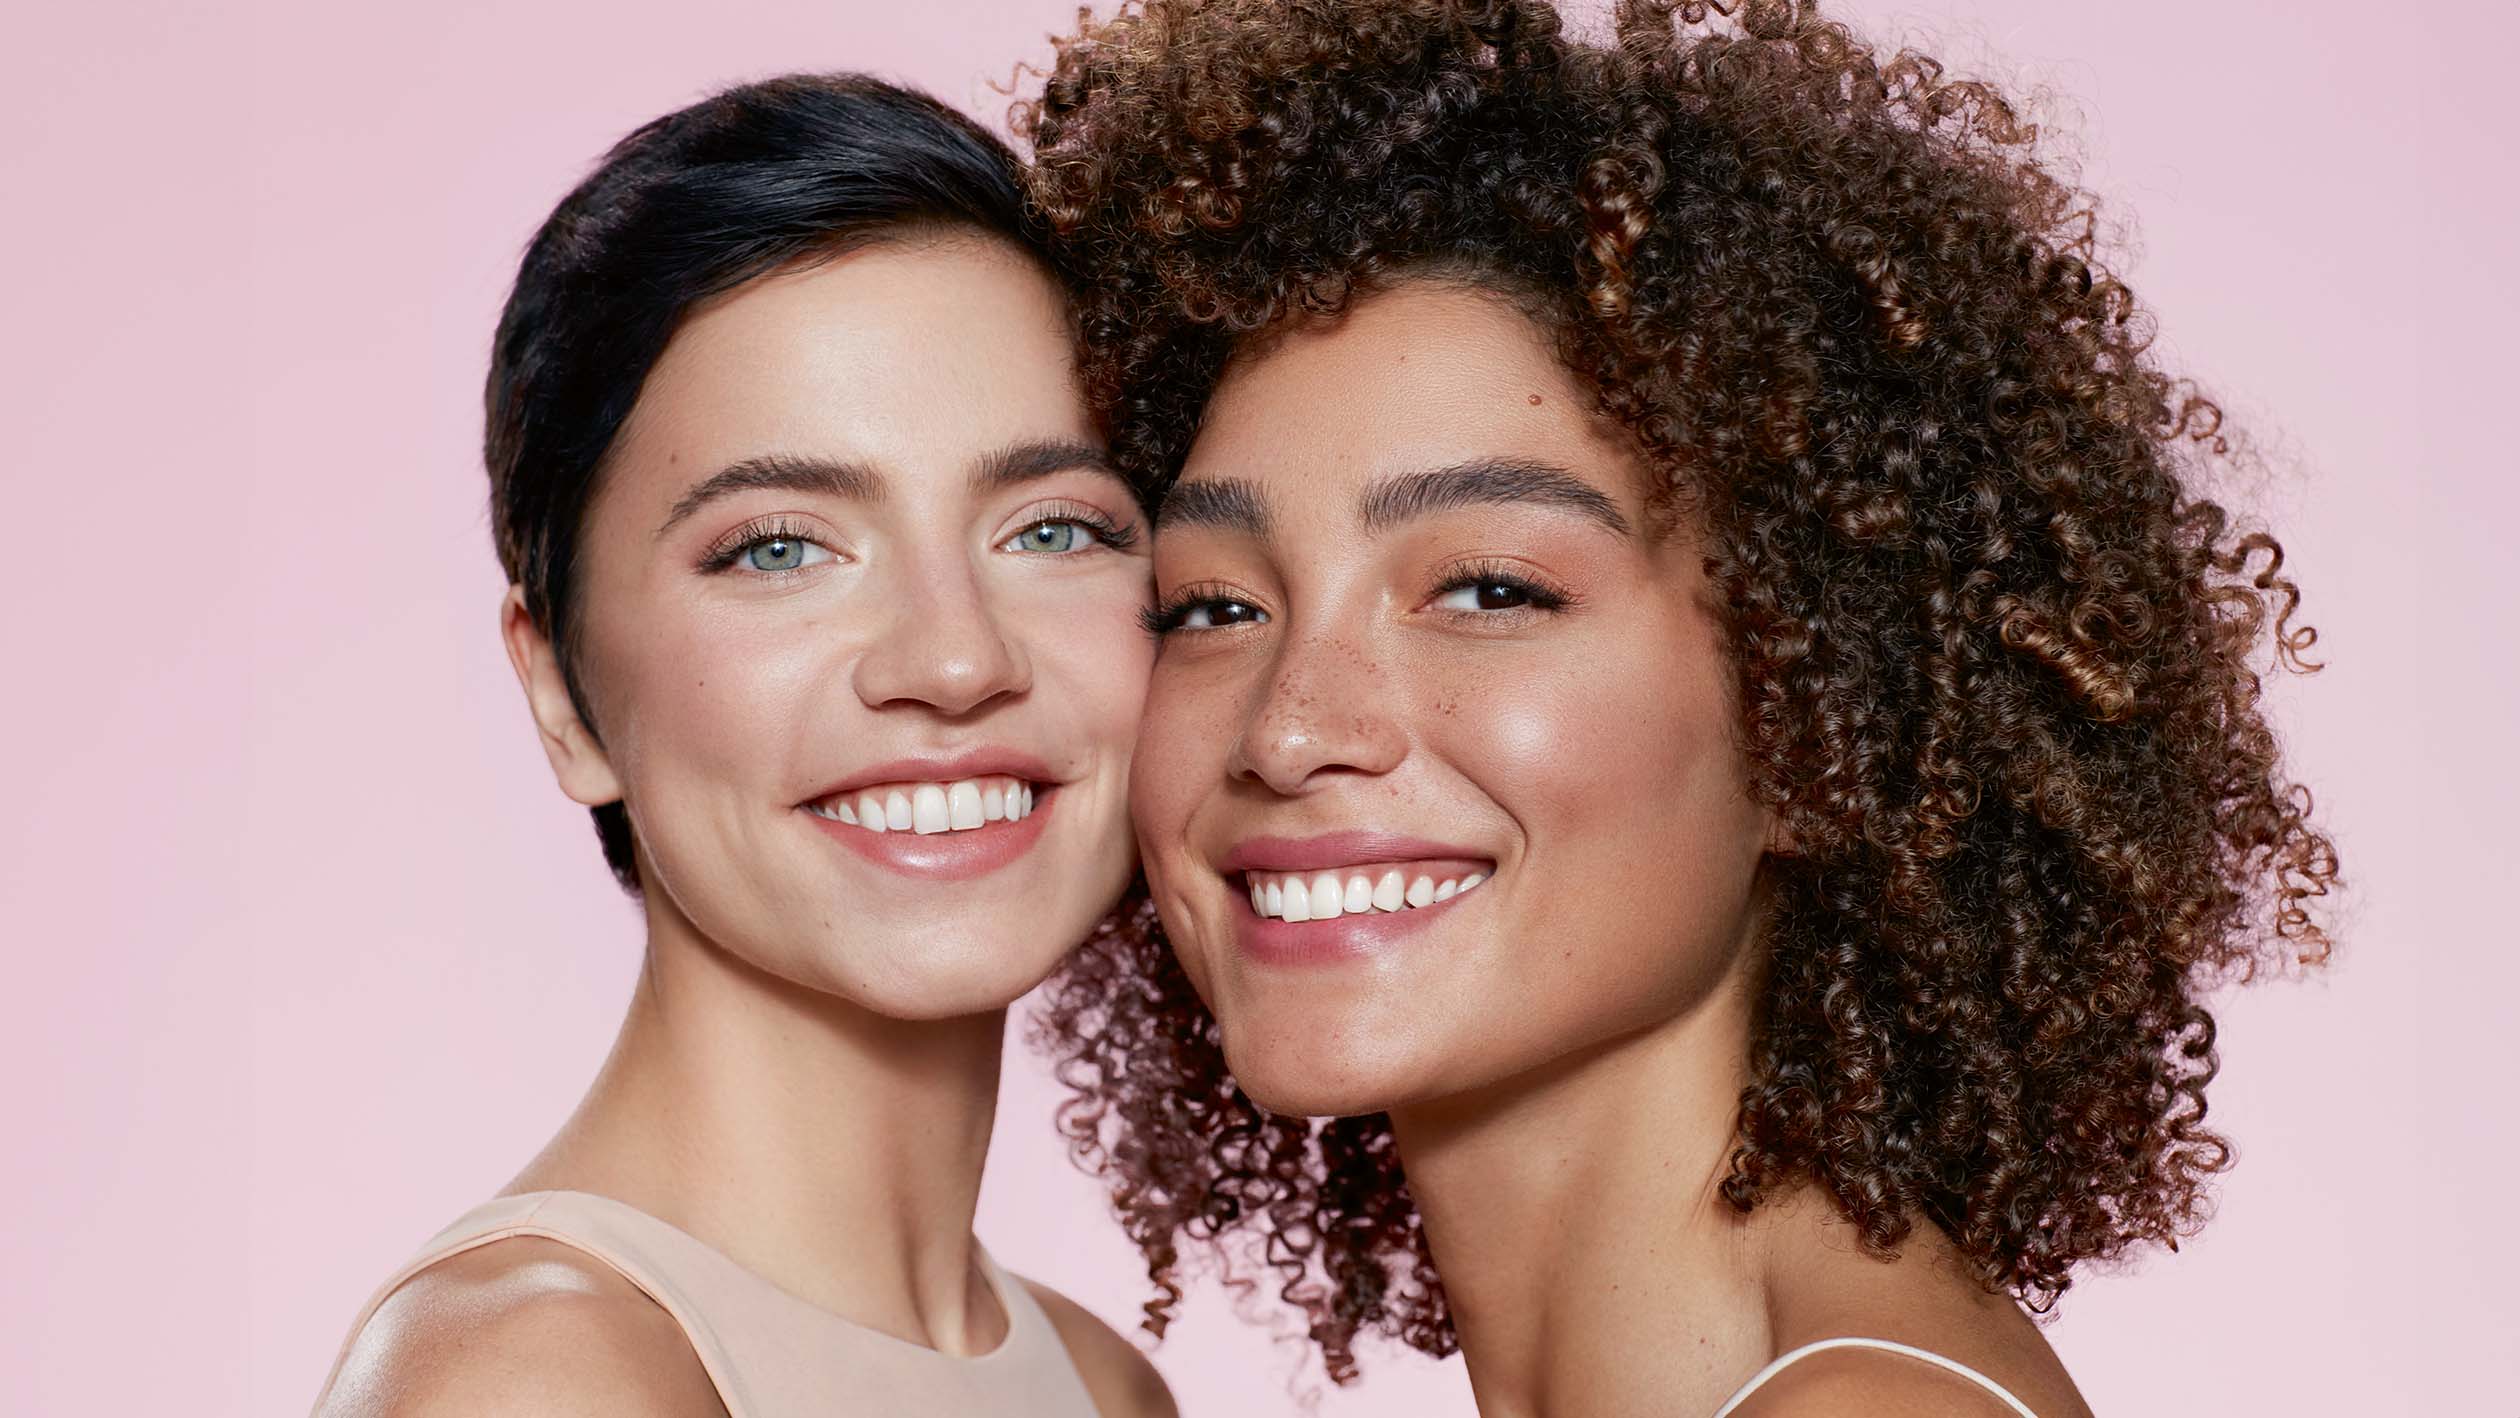 Two smiling female models looking into the camera